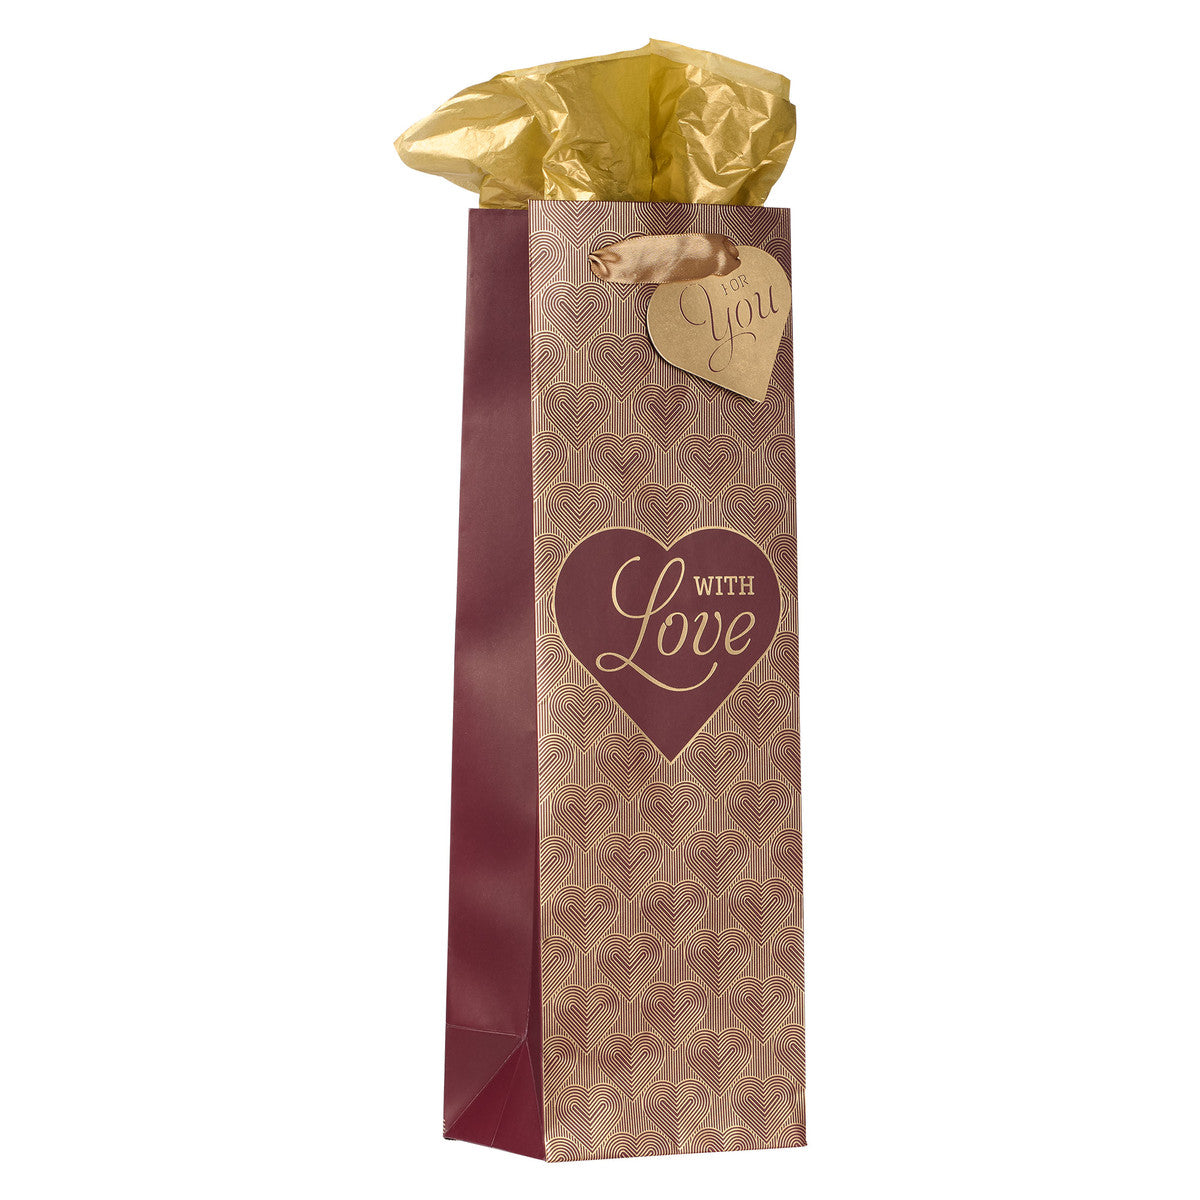 With Love Burgundy and Gold Bottle Gift Bag - The Christian Gift Company